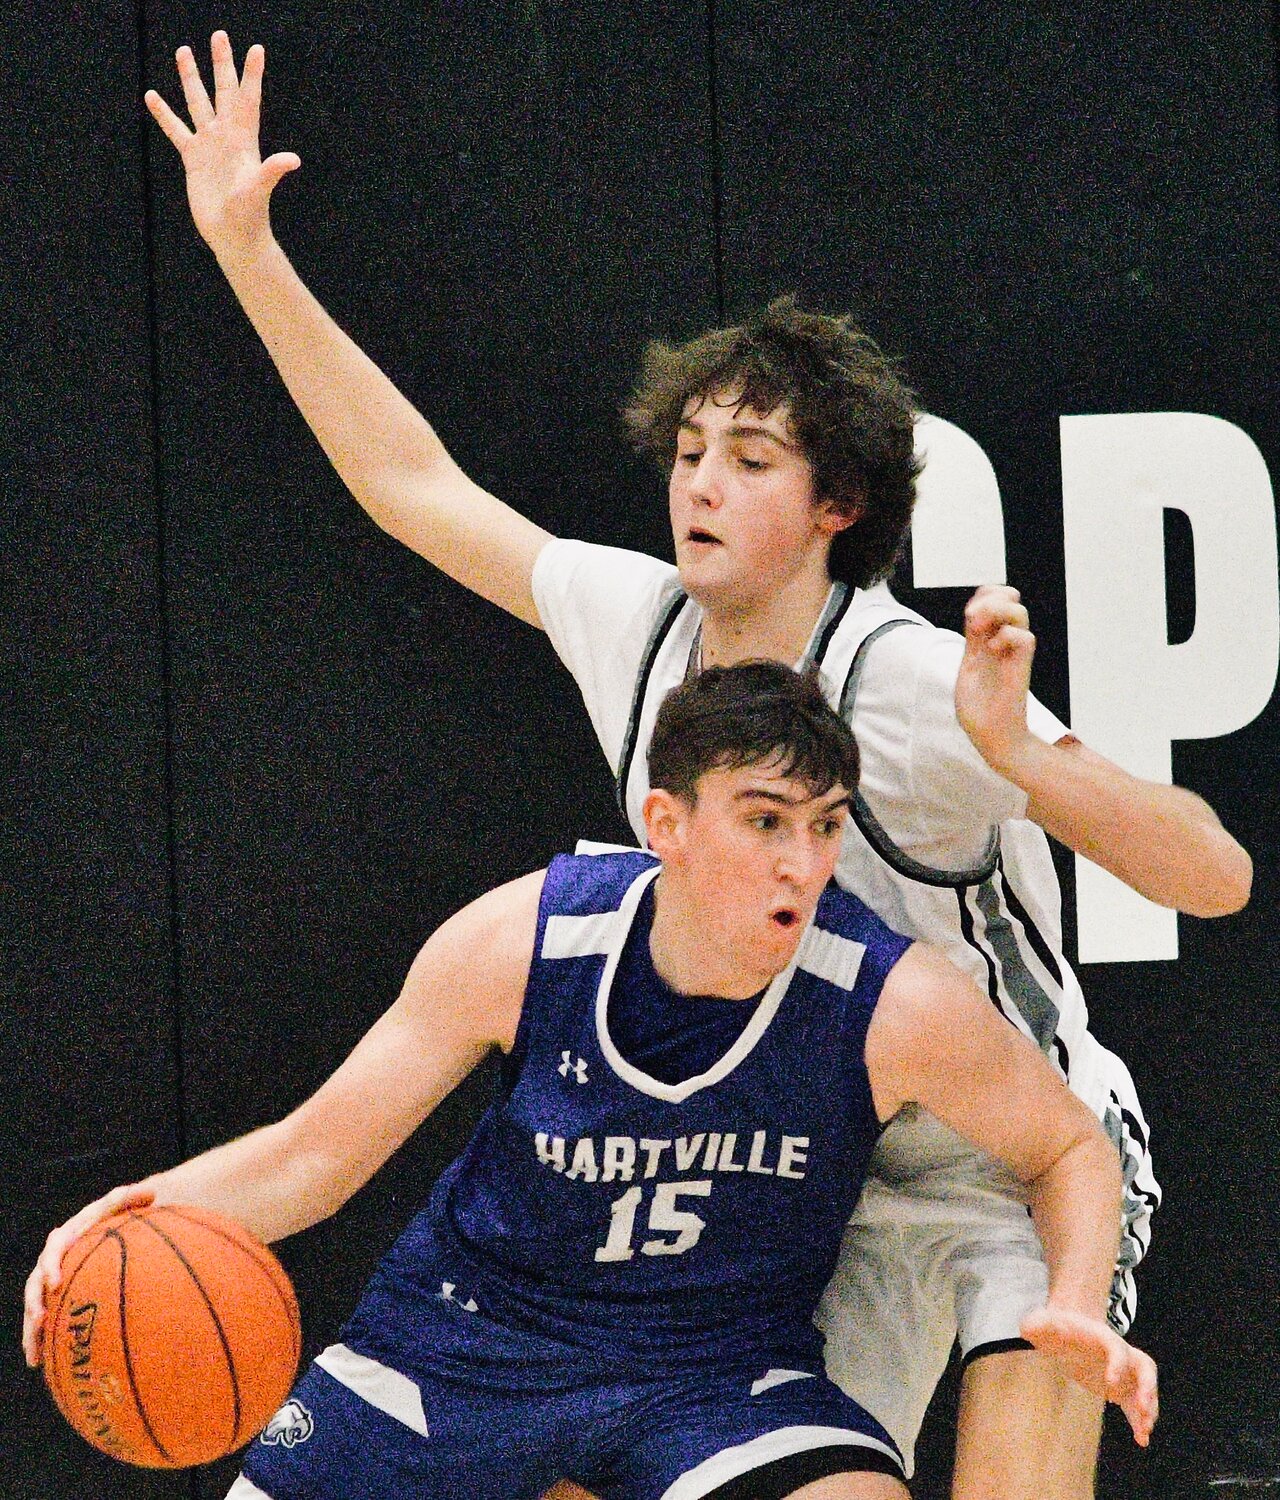 SPARTA'S TRENTON INGLE defends in the paint.